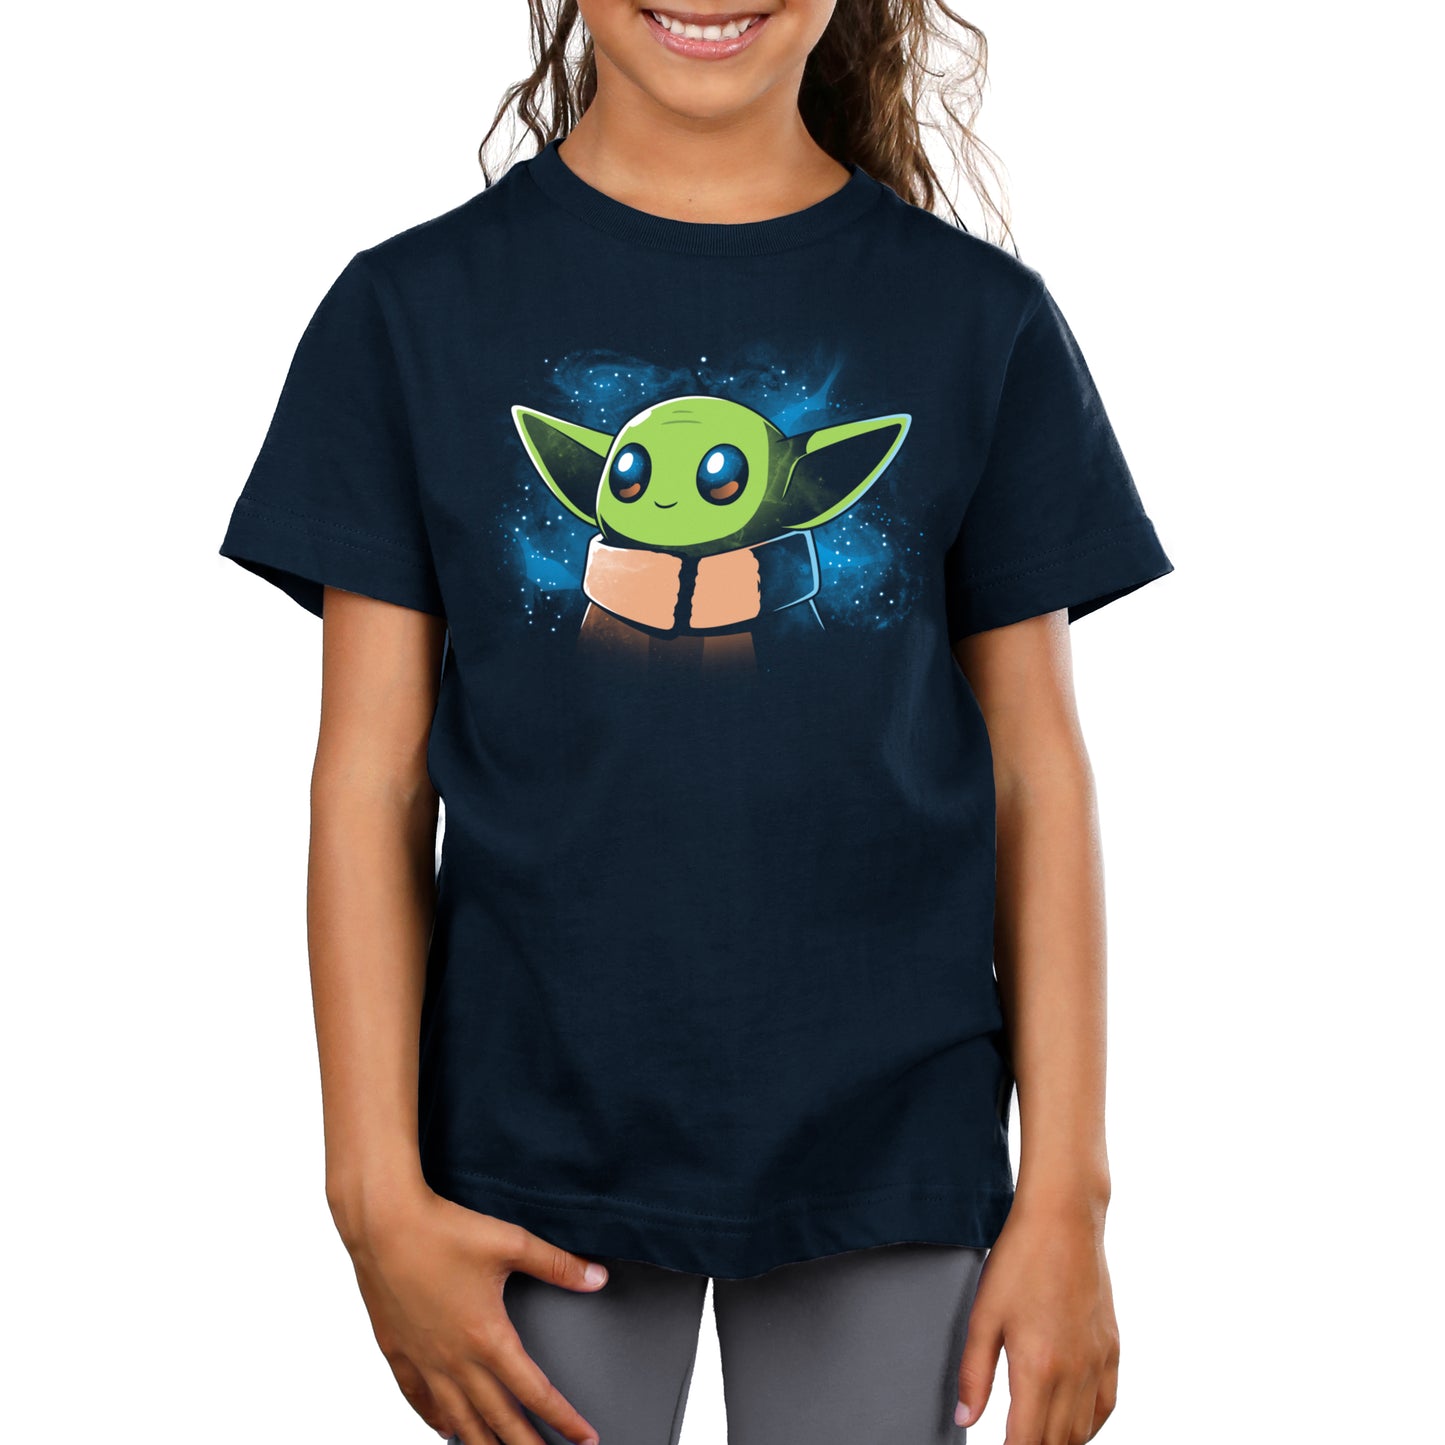 A girl wearing an officially licensed Star Wars T-shirt with The Child in Space (baby Yoda) on it.